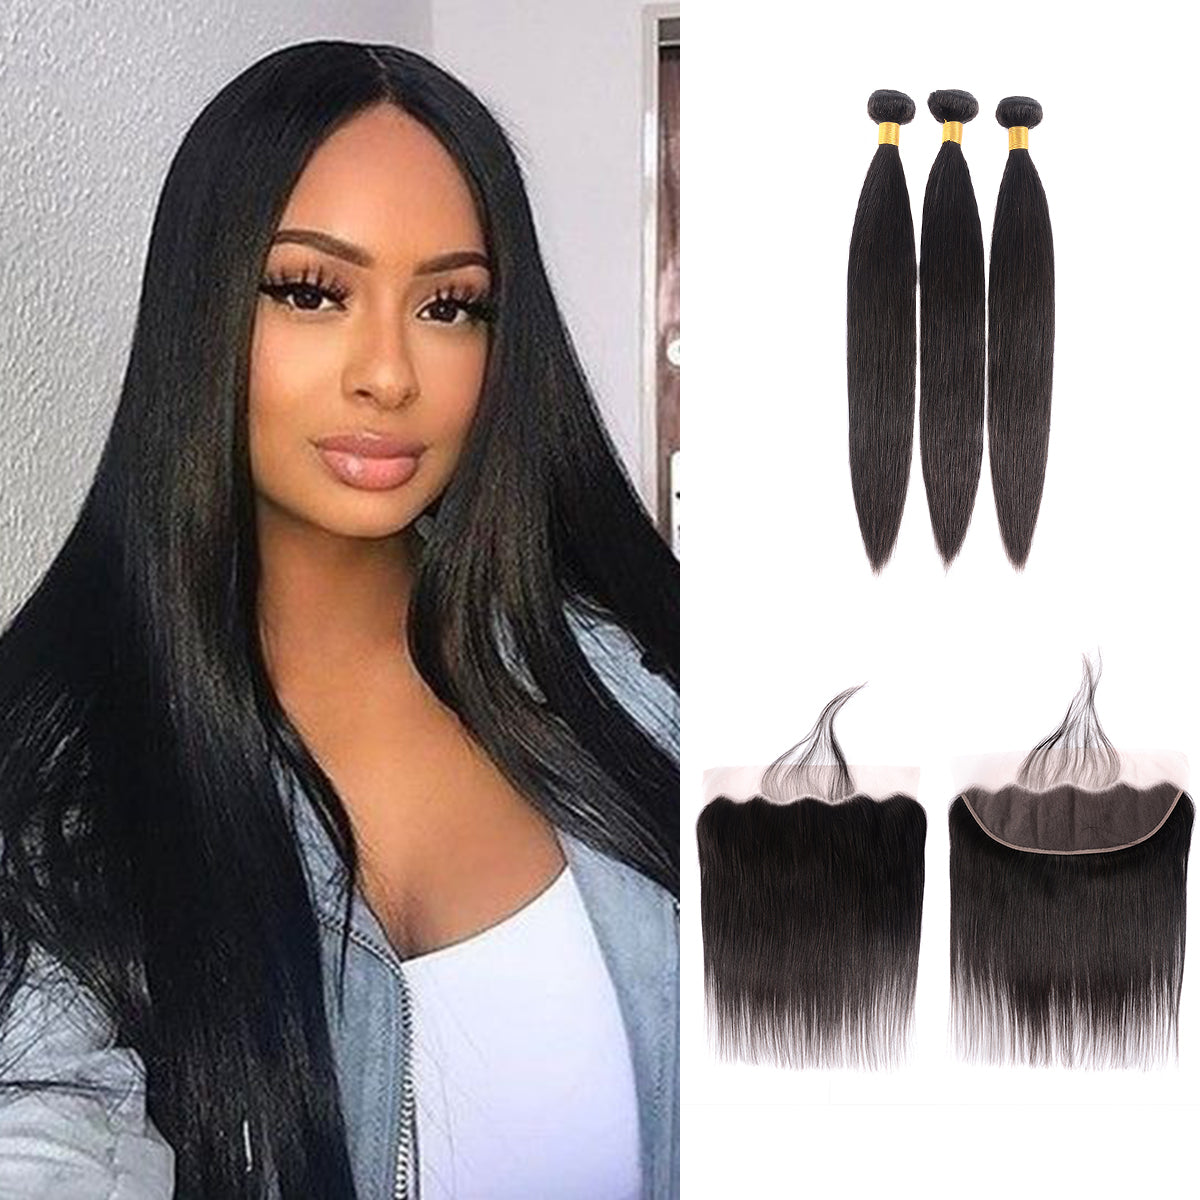 Siyun Show Straight Hair 3 Bundles With Lace Frontal 14-30 Inch